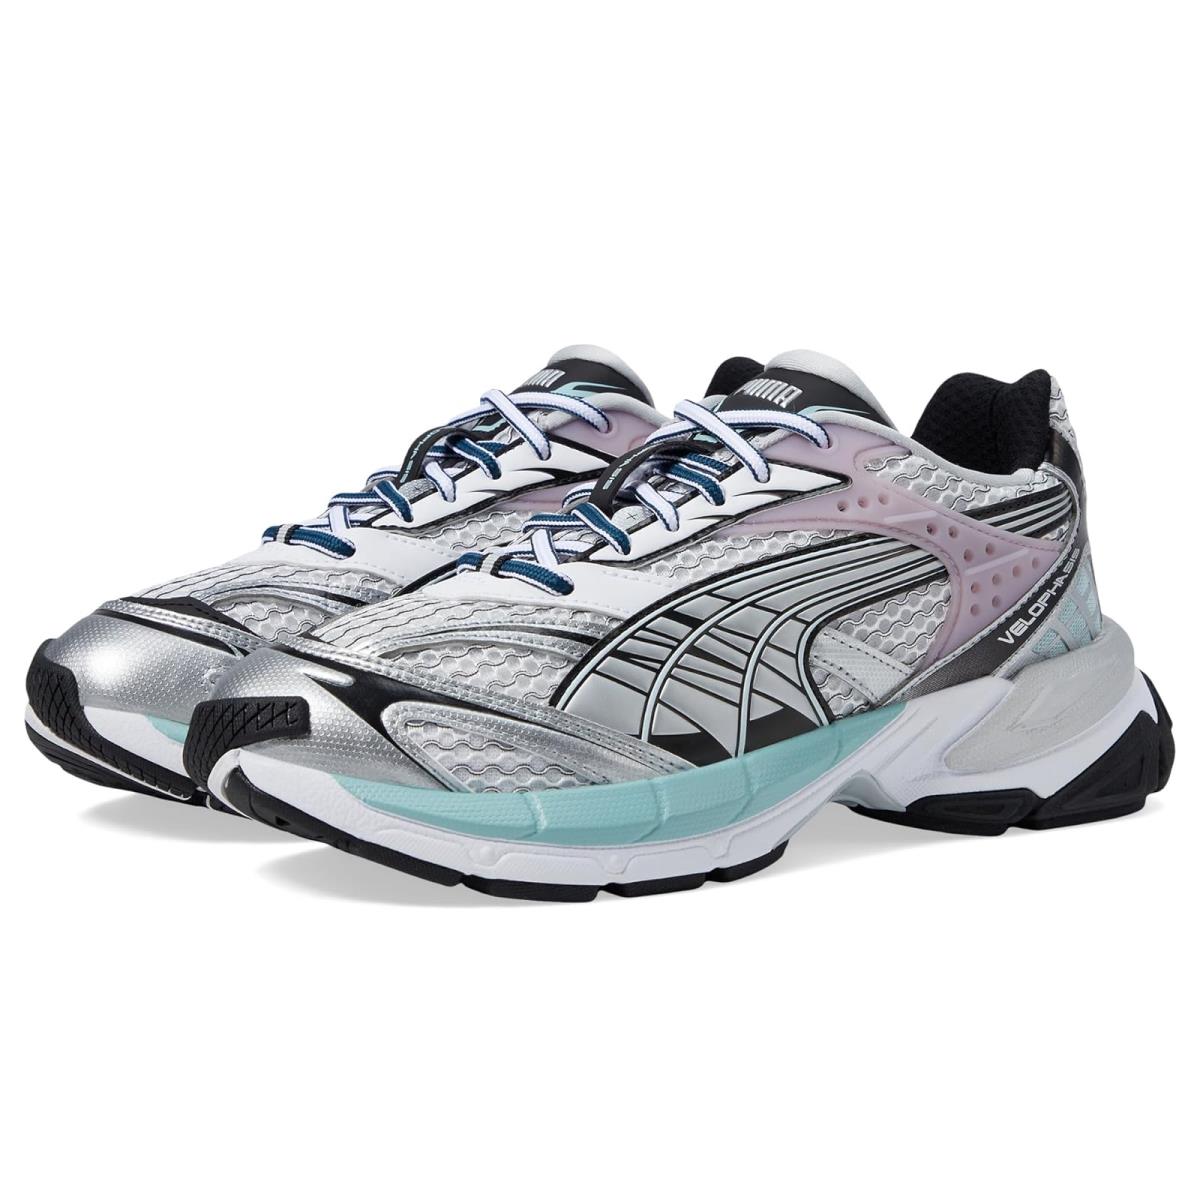 Woman`s Sneakers Athletic Shoes Puma Velophasis Phased PUMA White/PUMA Silver/Dewdrop